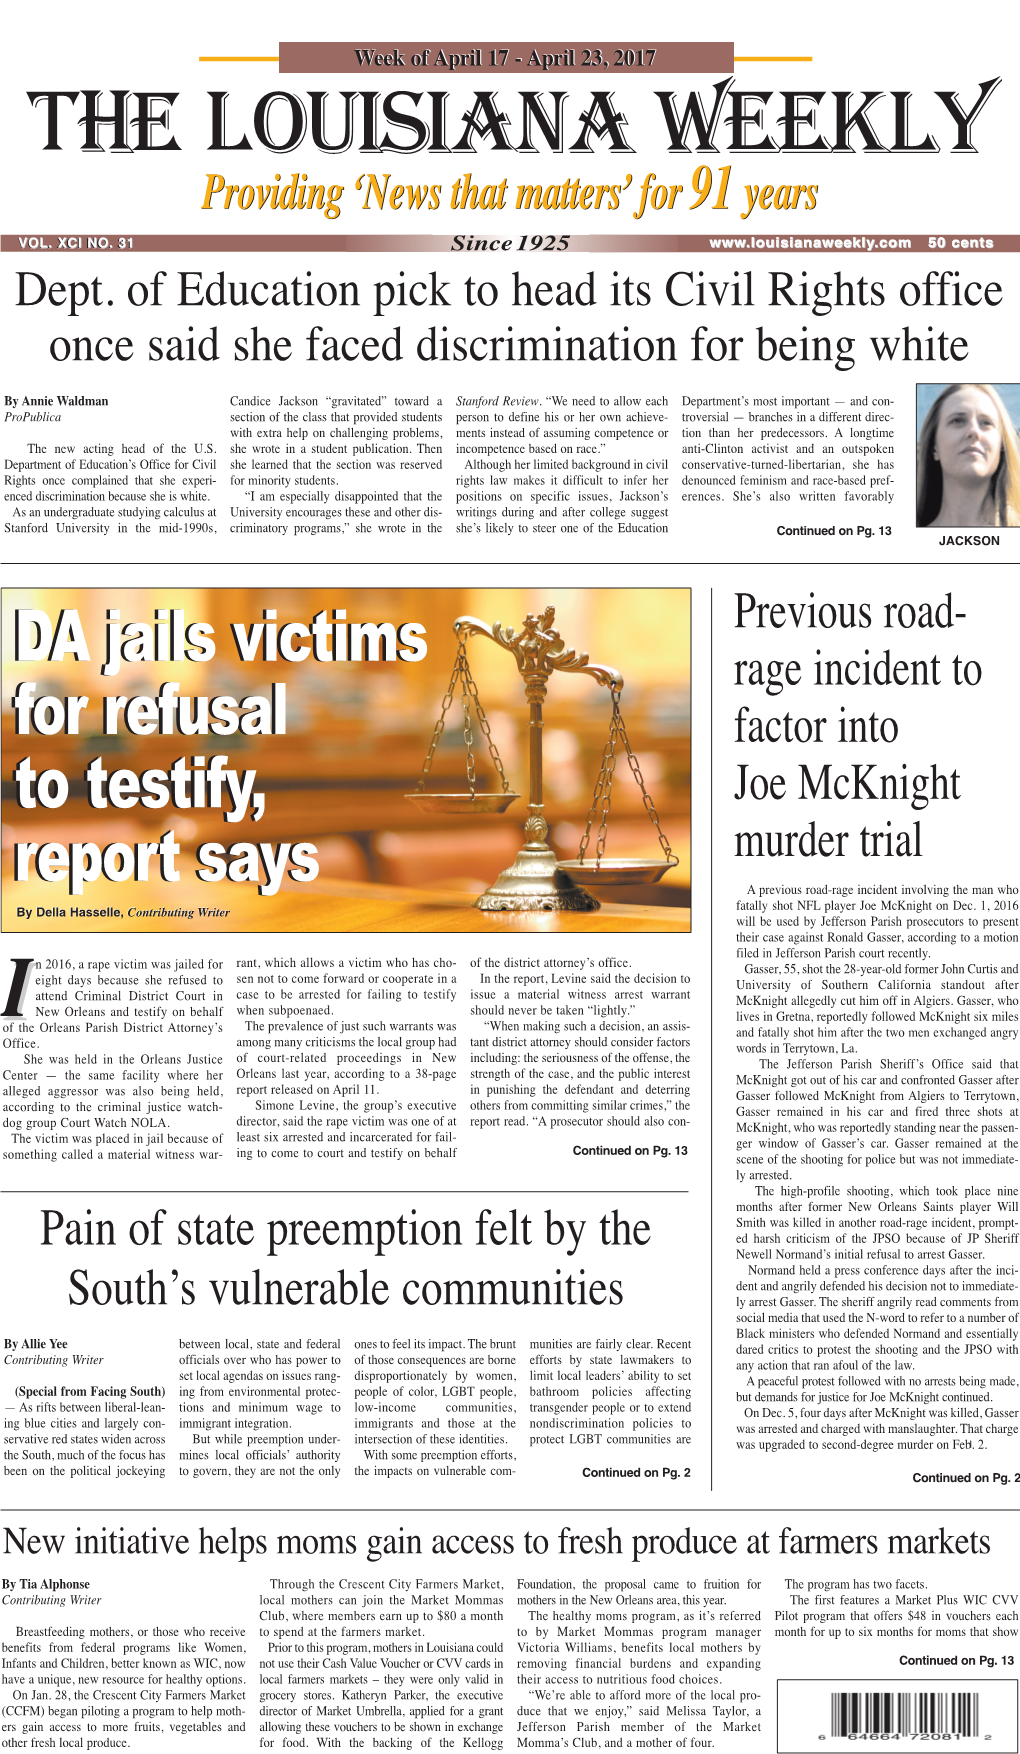 DA Jails Victims for Refusal to Testify, Report Says DA Jails Victims For